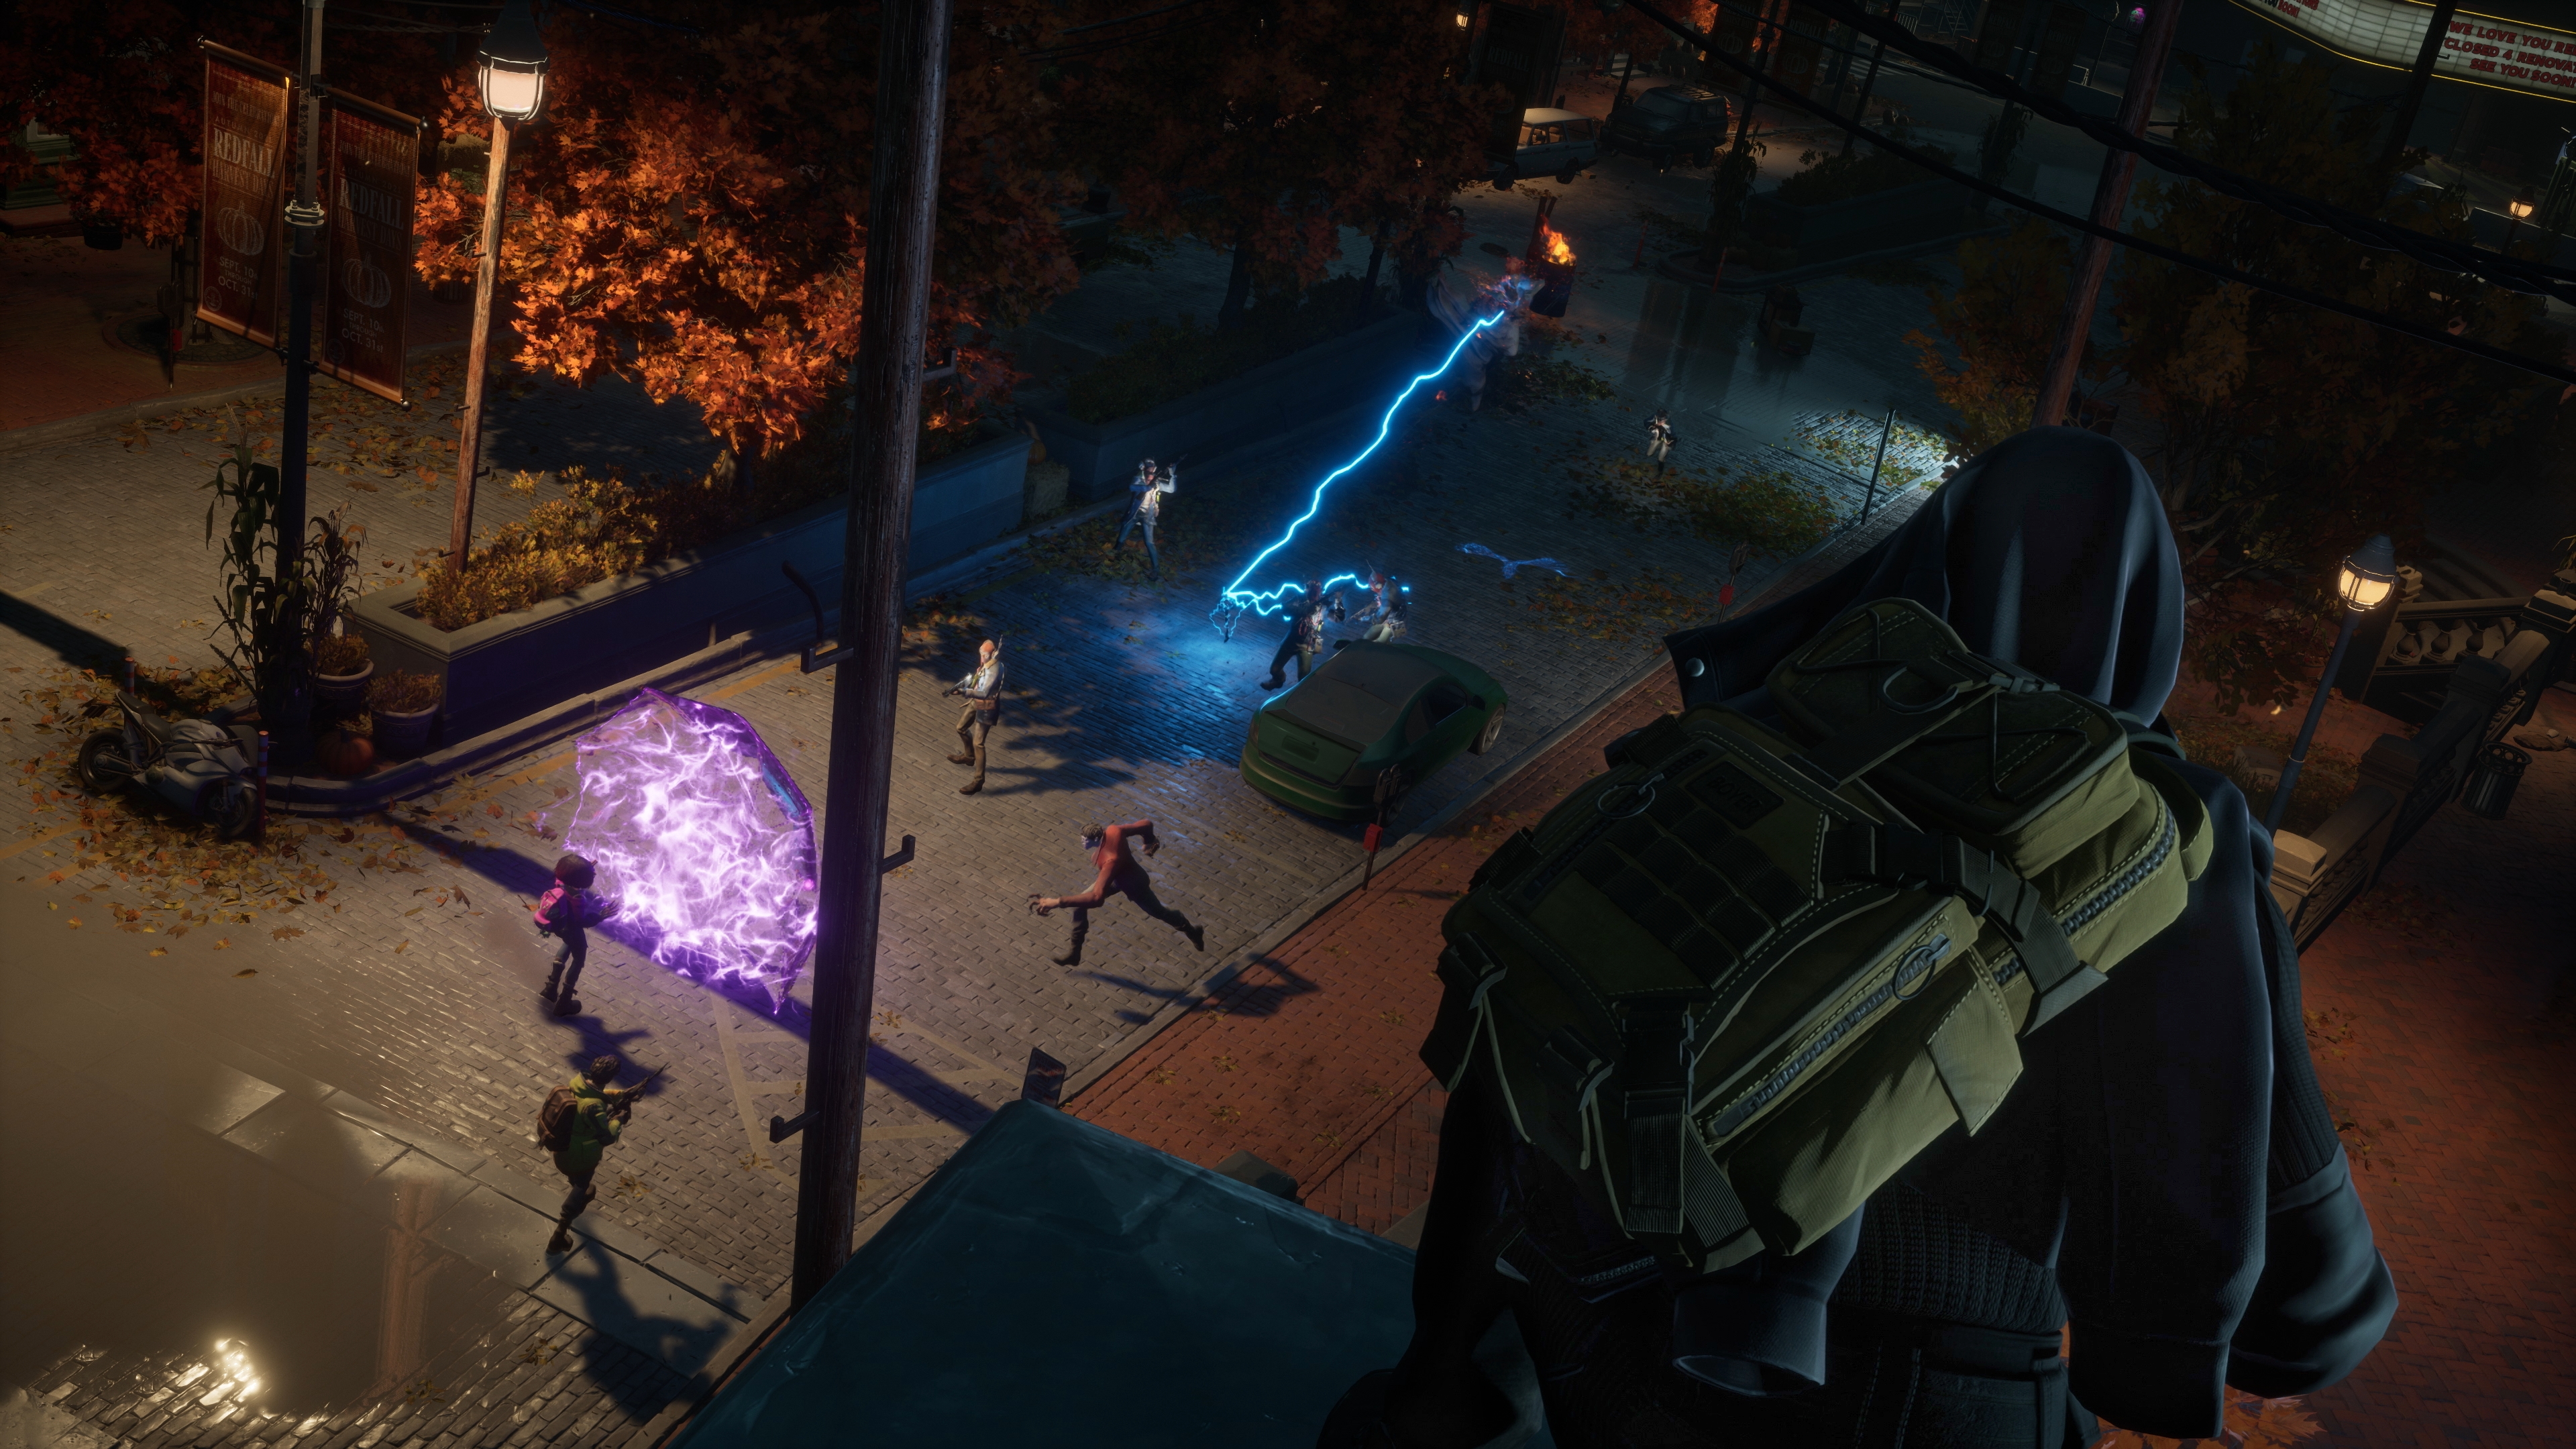 Redfall gets a new release date and in-depth gameplay reveal